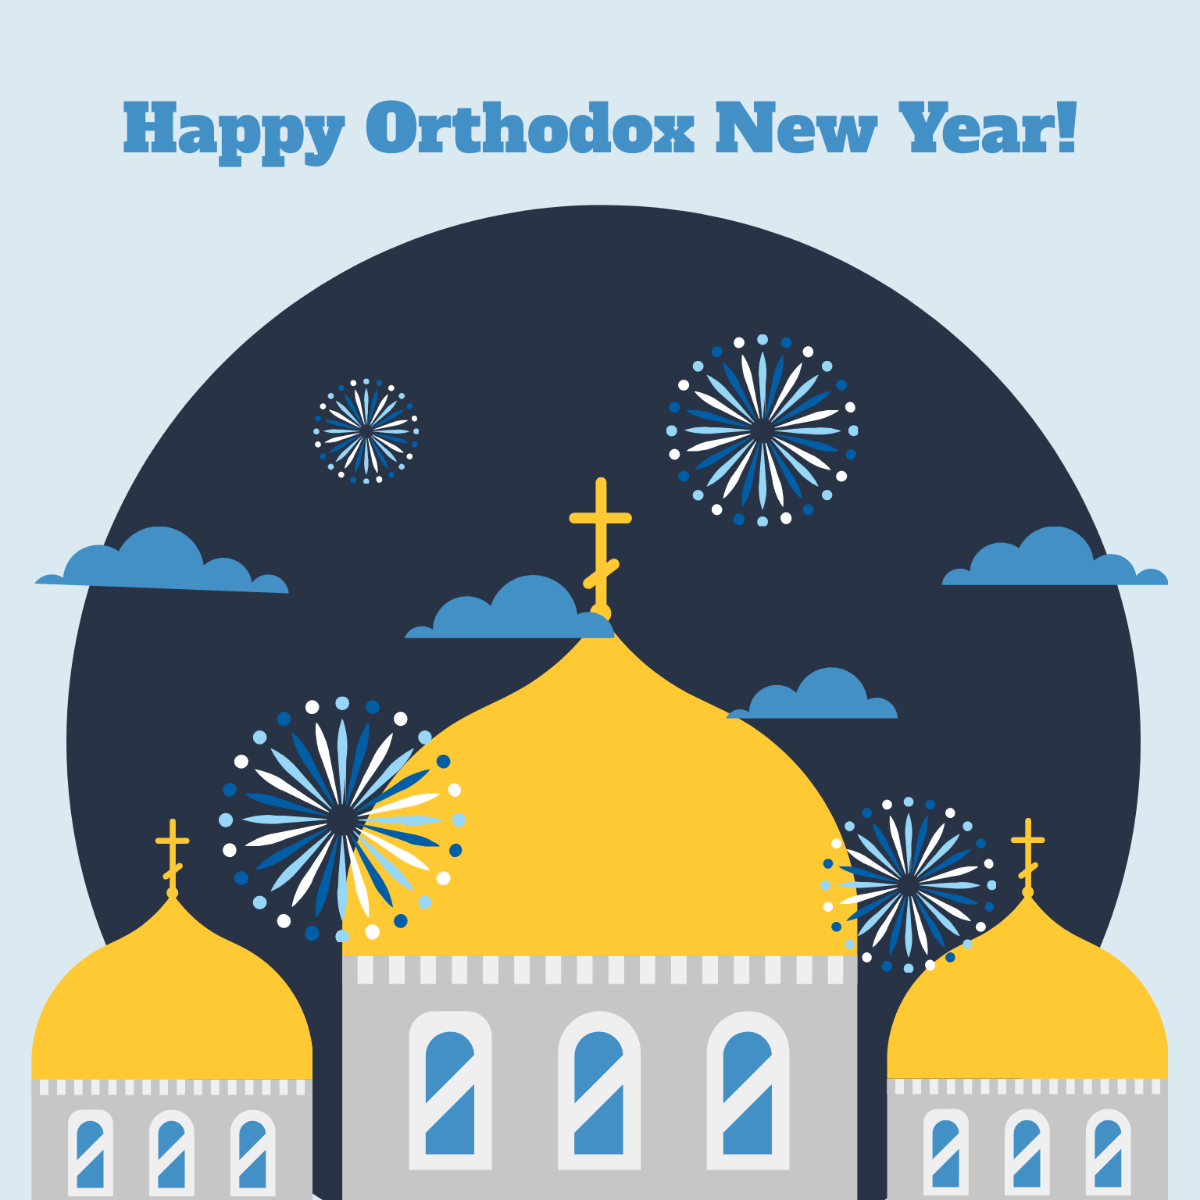 Free Happy Orthodox New Year Vector Template